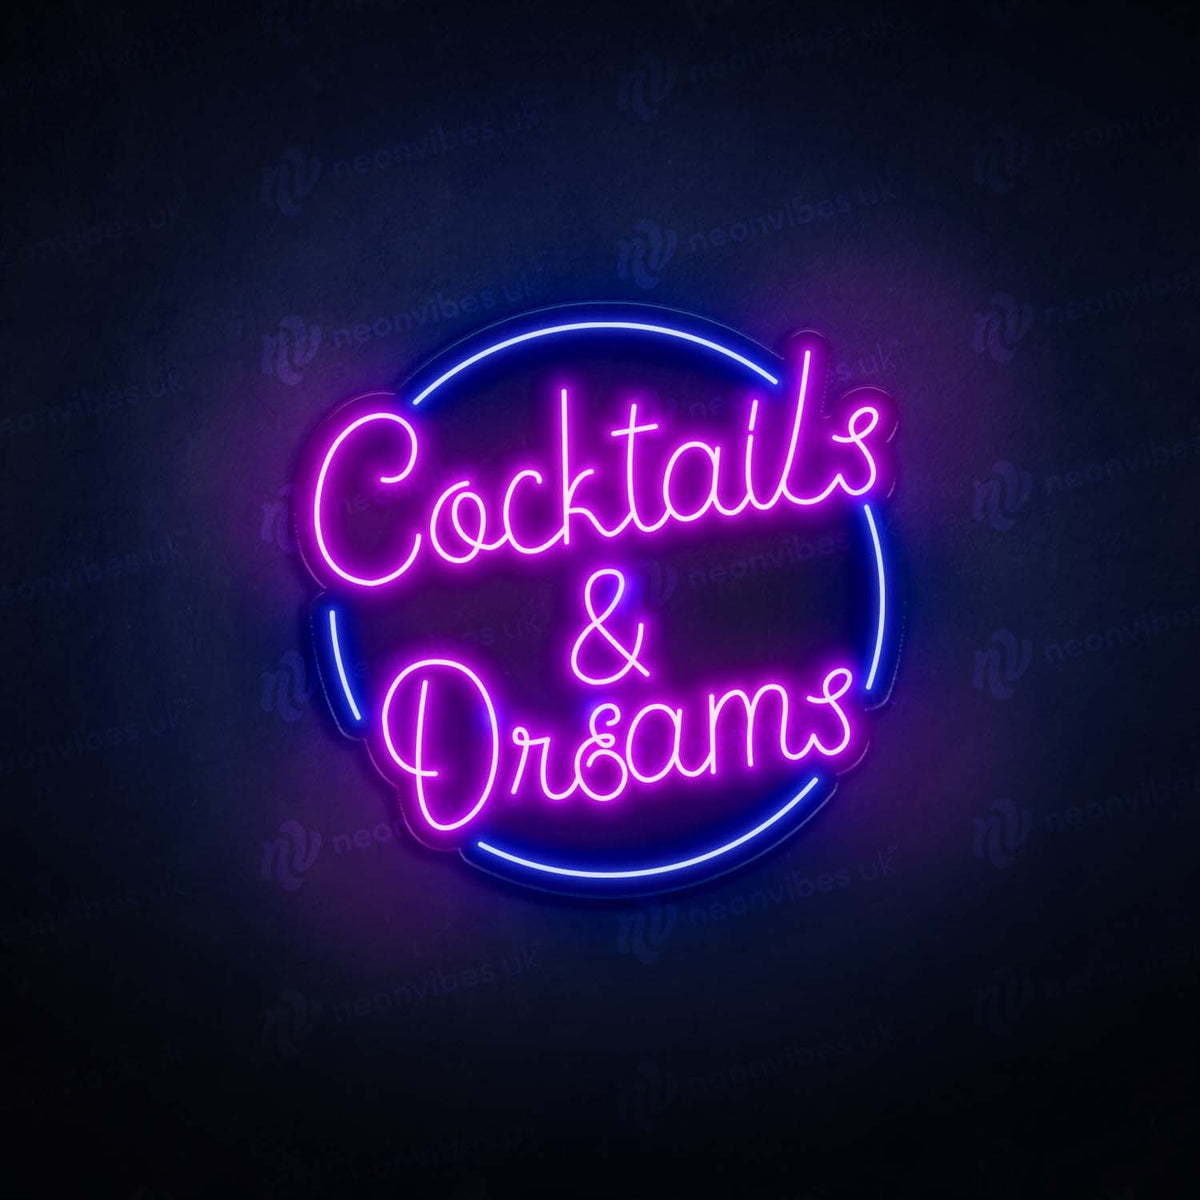 Cocktails and dreams neon sign